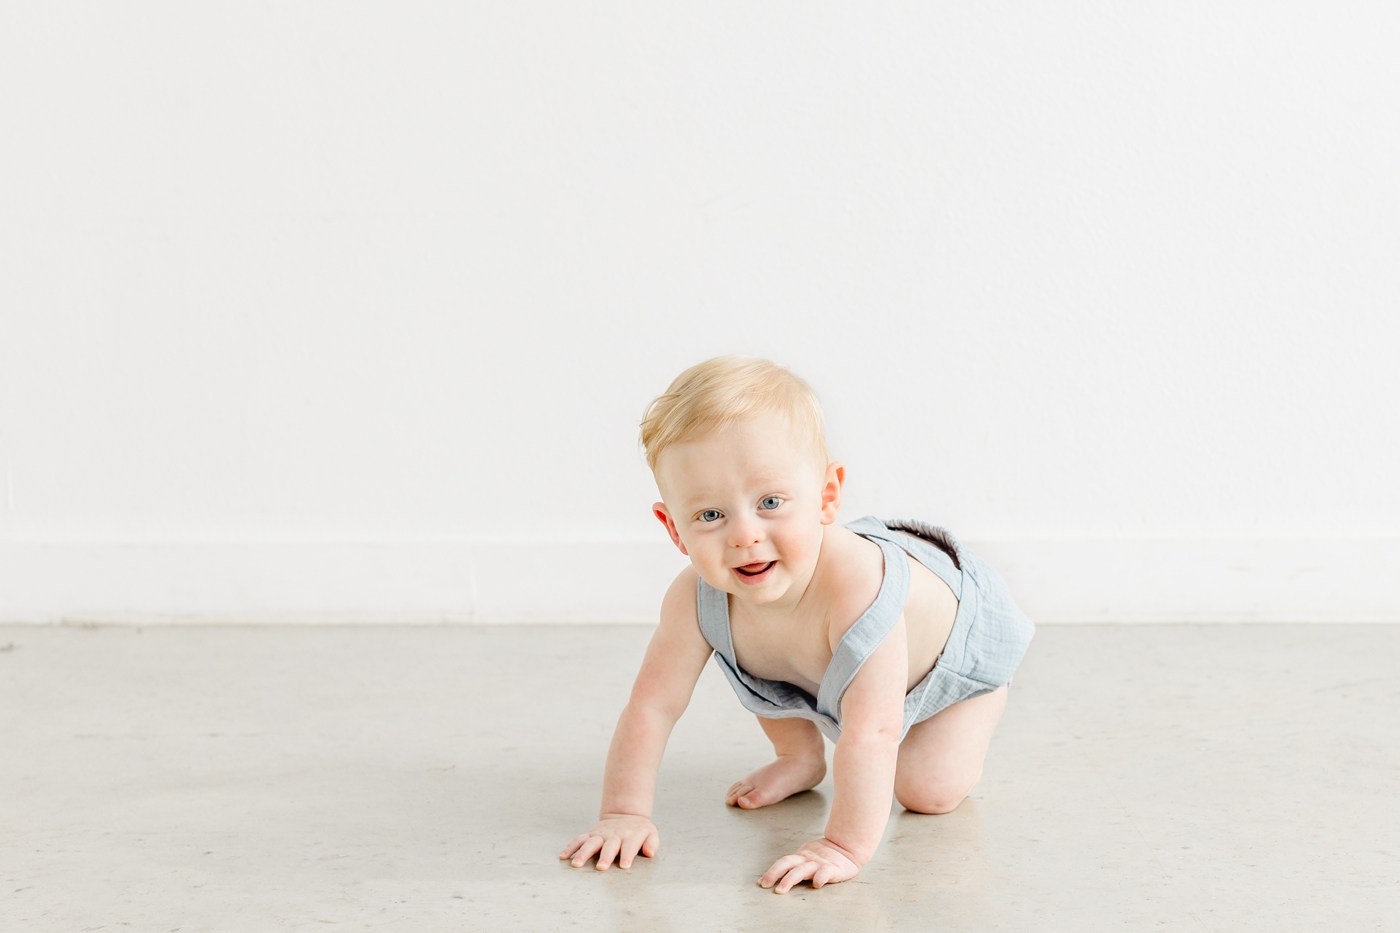 Little boy crawling on the studio floor during milestone session for first birthday. Photo by Sana Ahmed Photography.